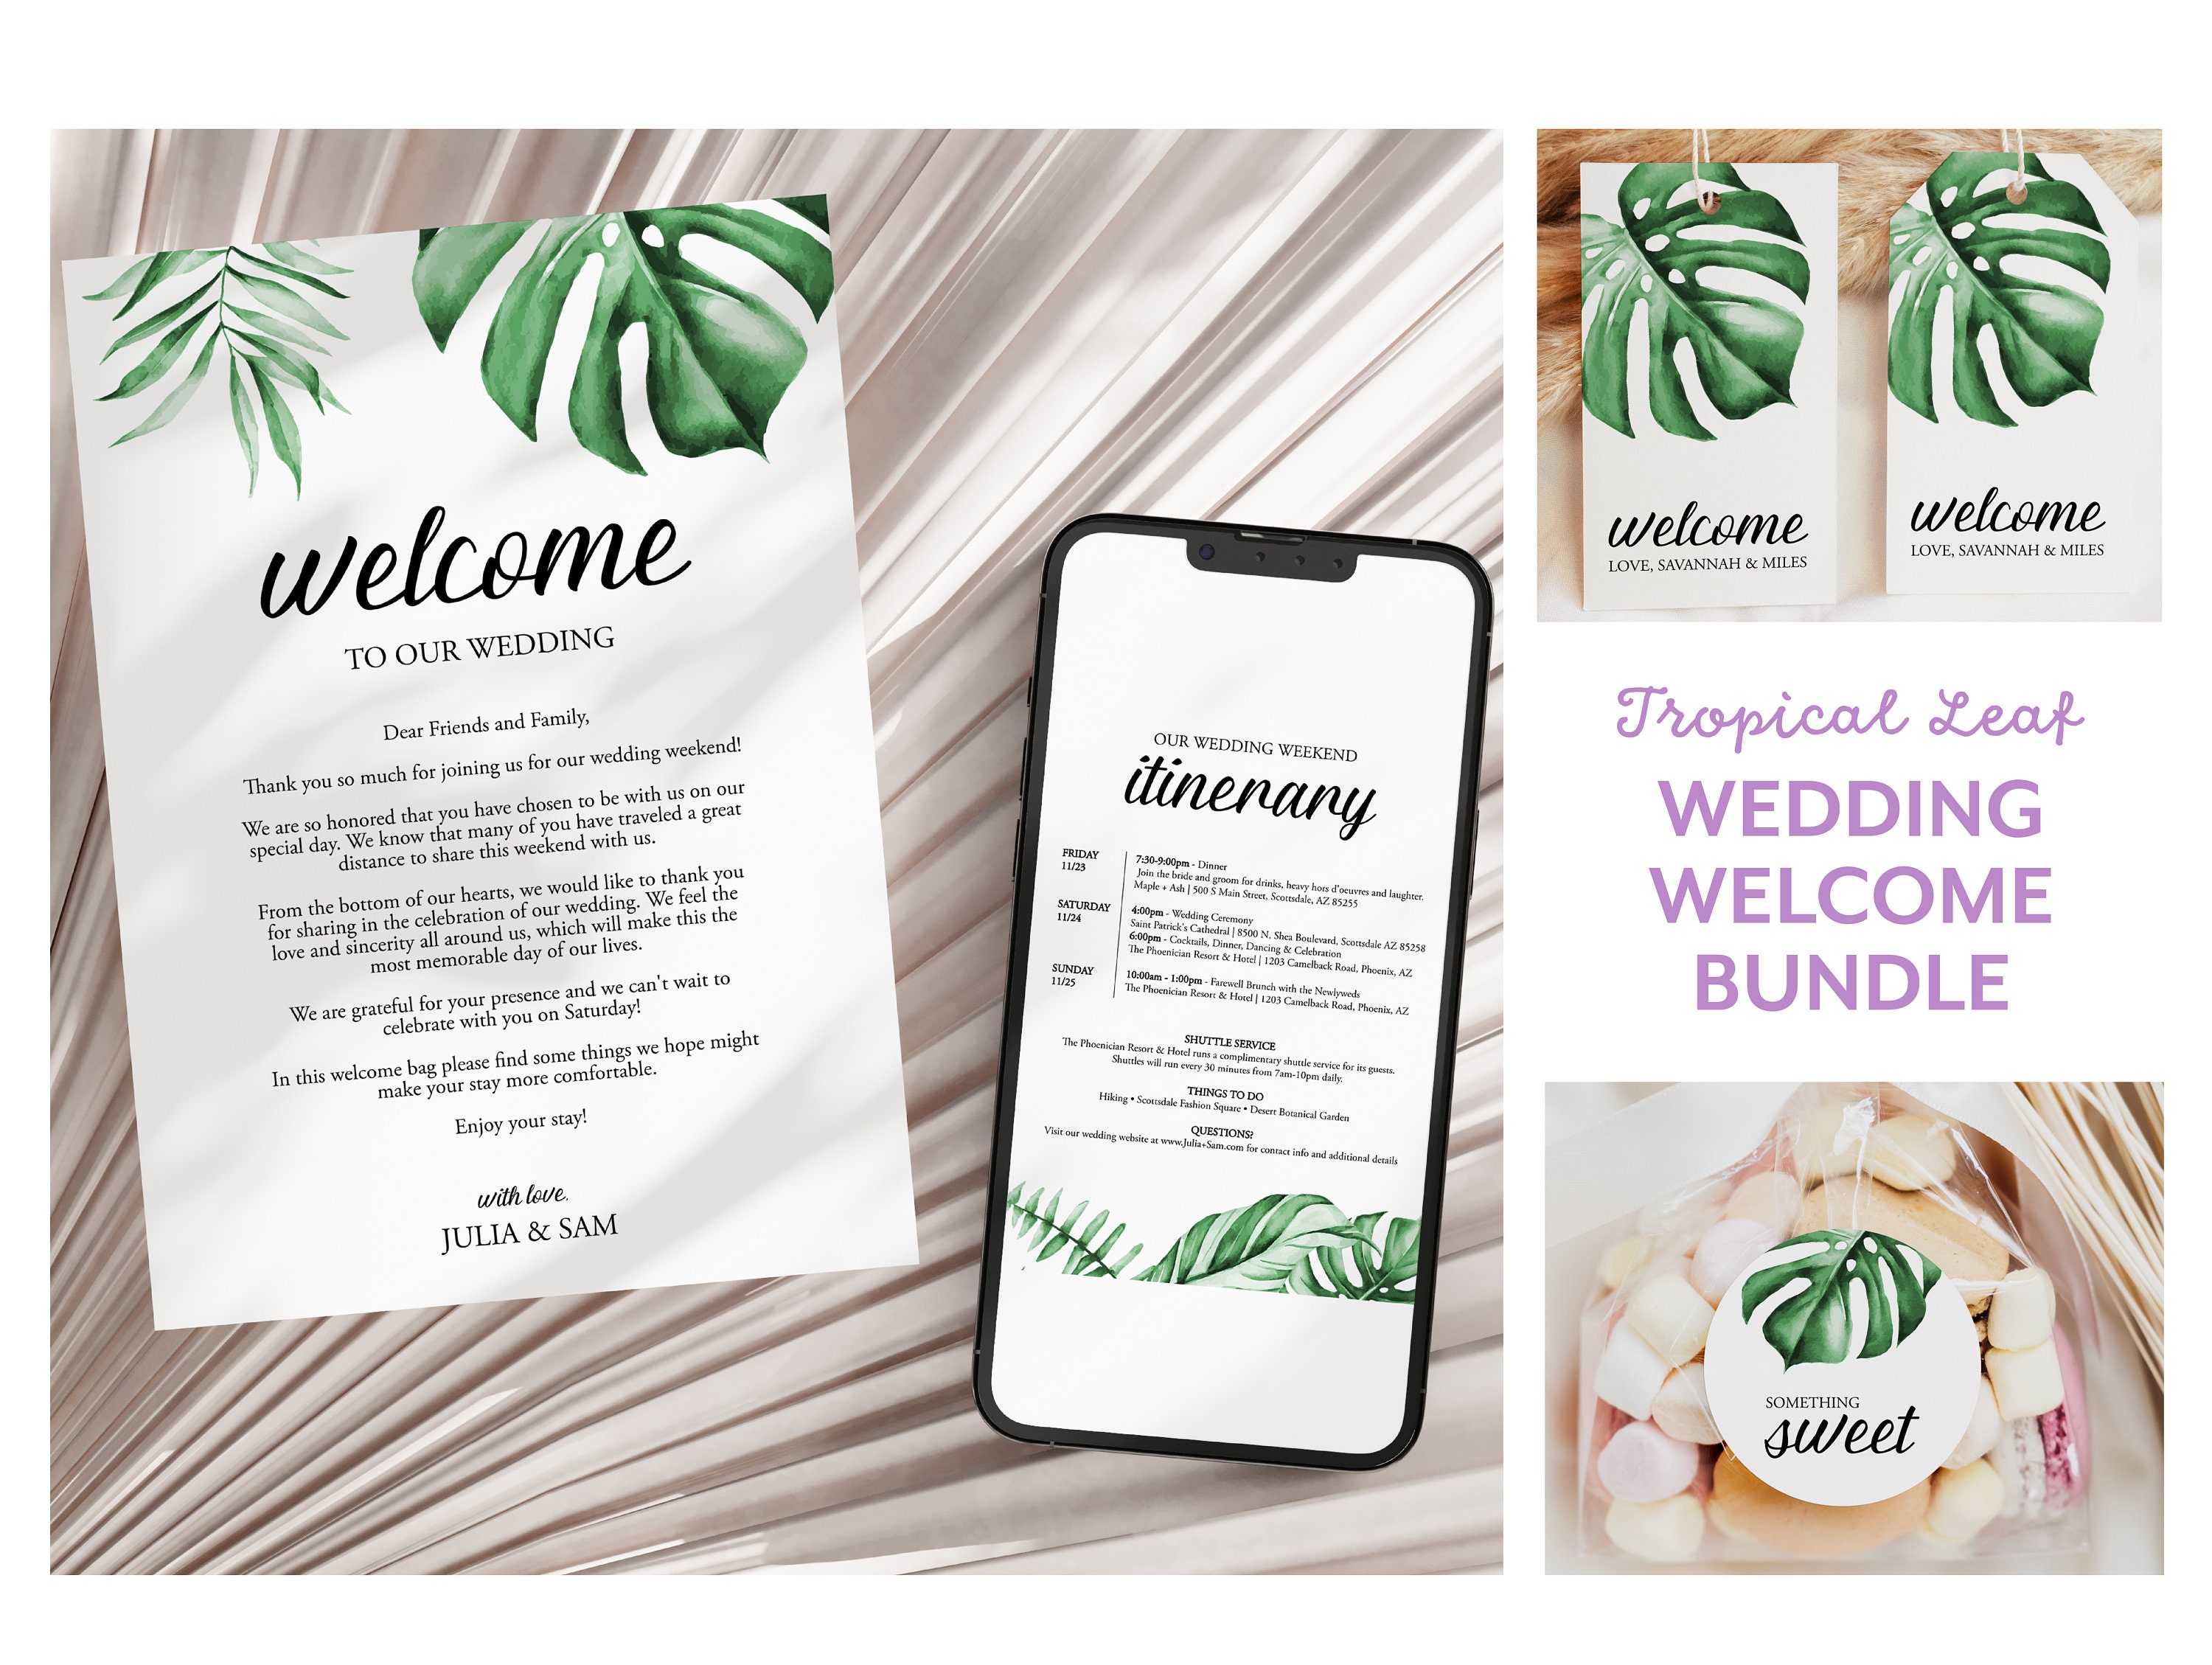 Thoughtful Wedding Gifts That Will Make the Newlyweds Feel Special - Groovy  Groomsmen Gifts